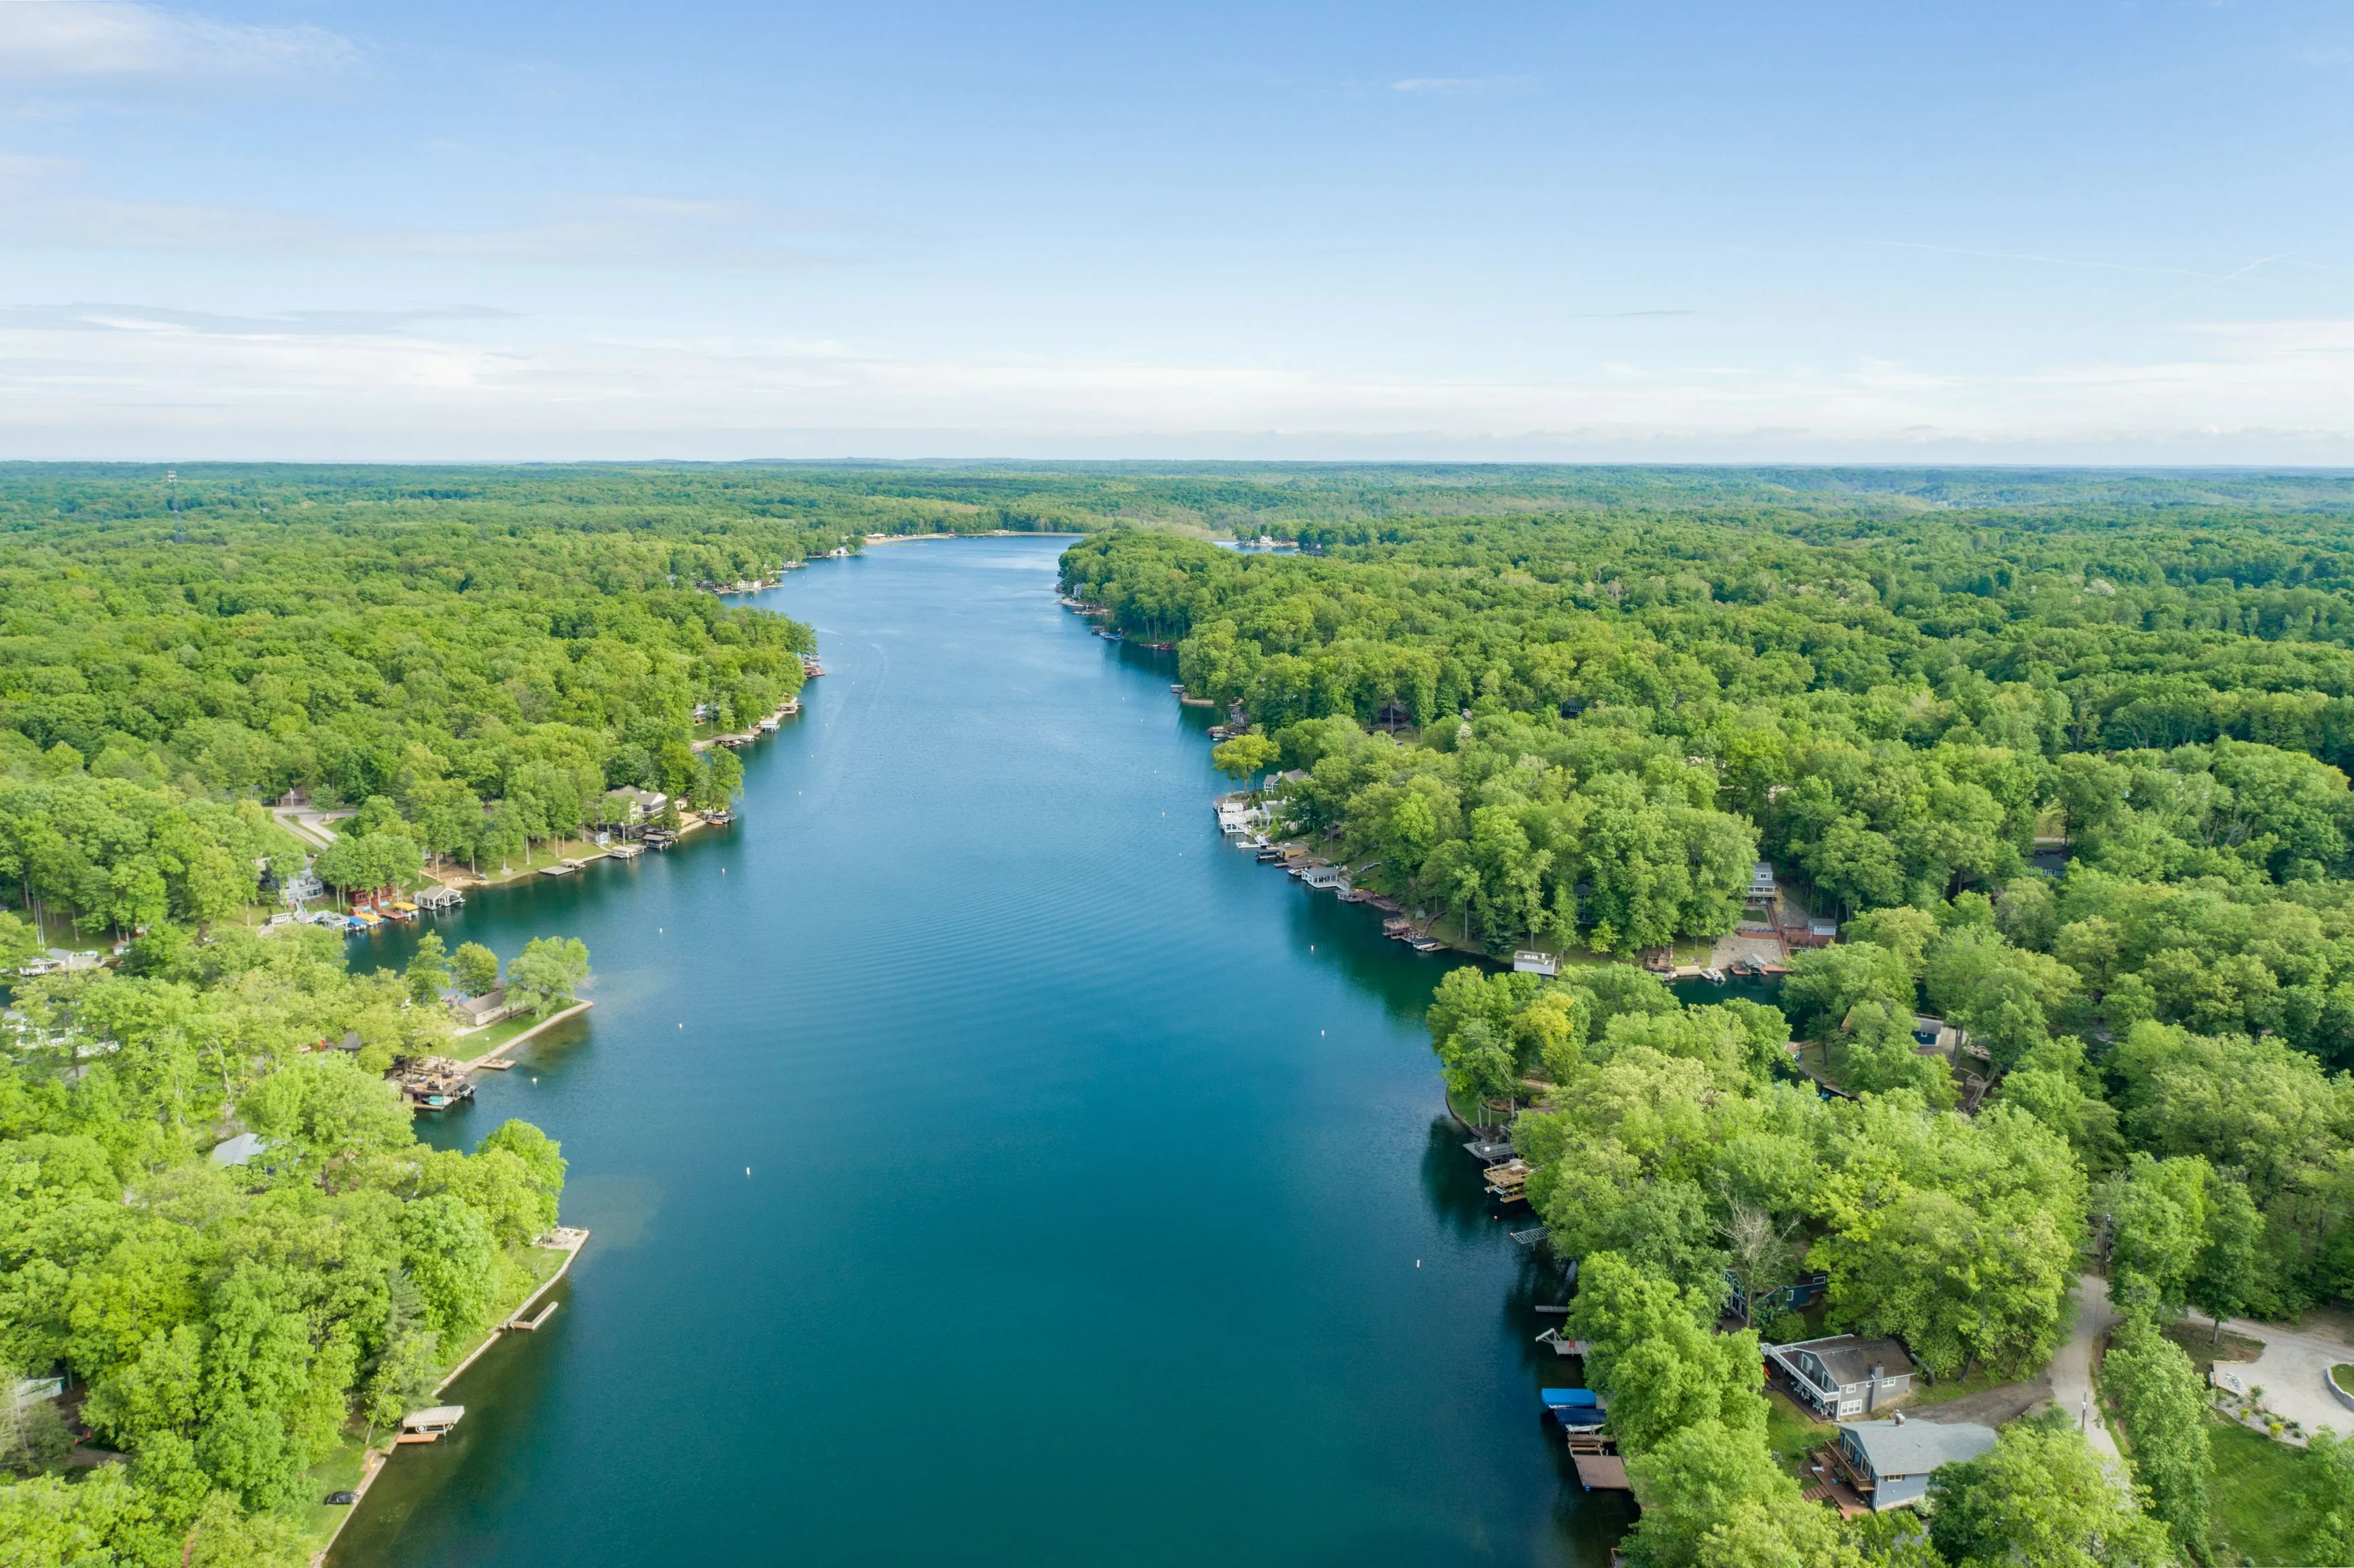 Aerial view of a tranquil river flanked by lush green forests under a clear blue sky.